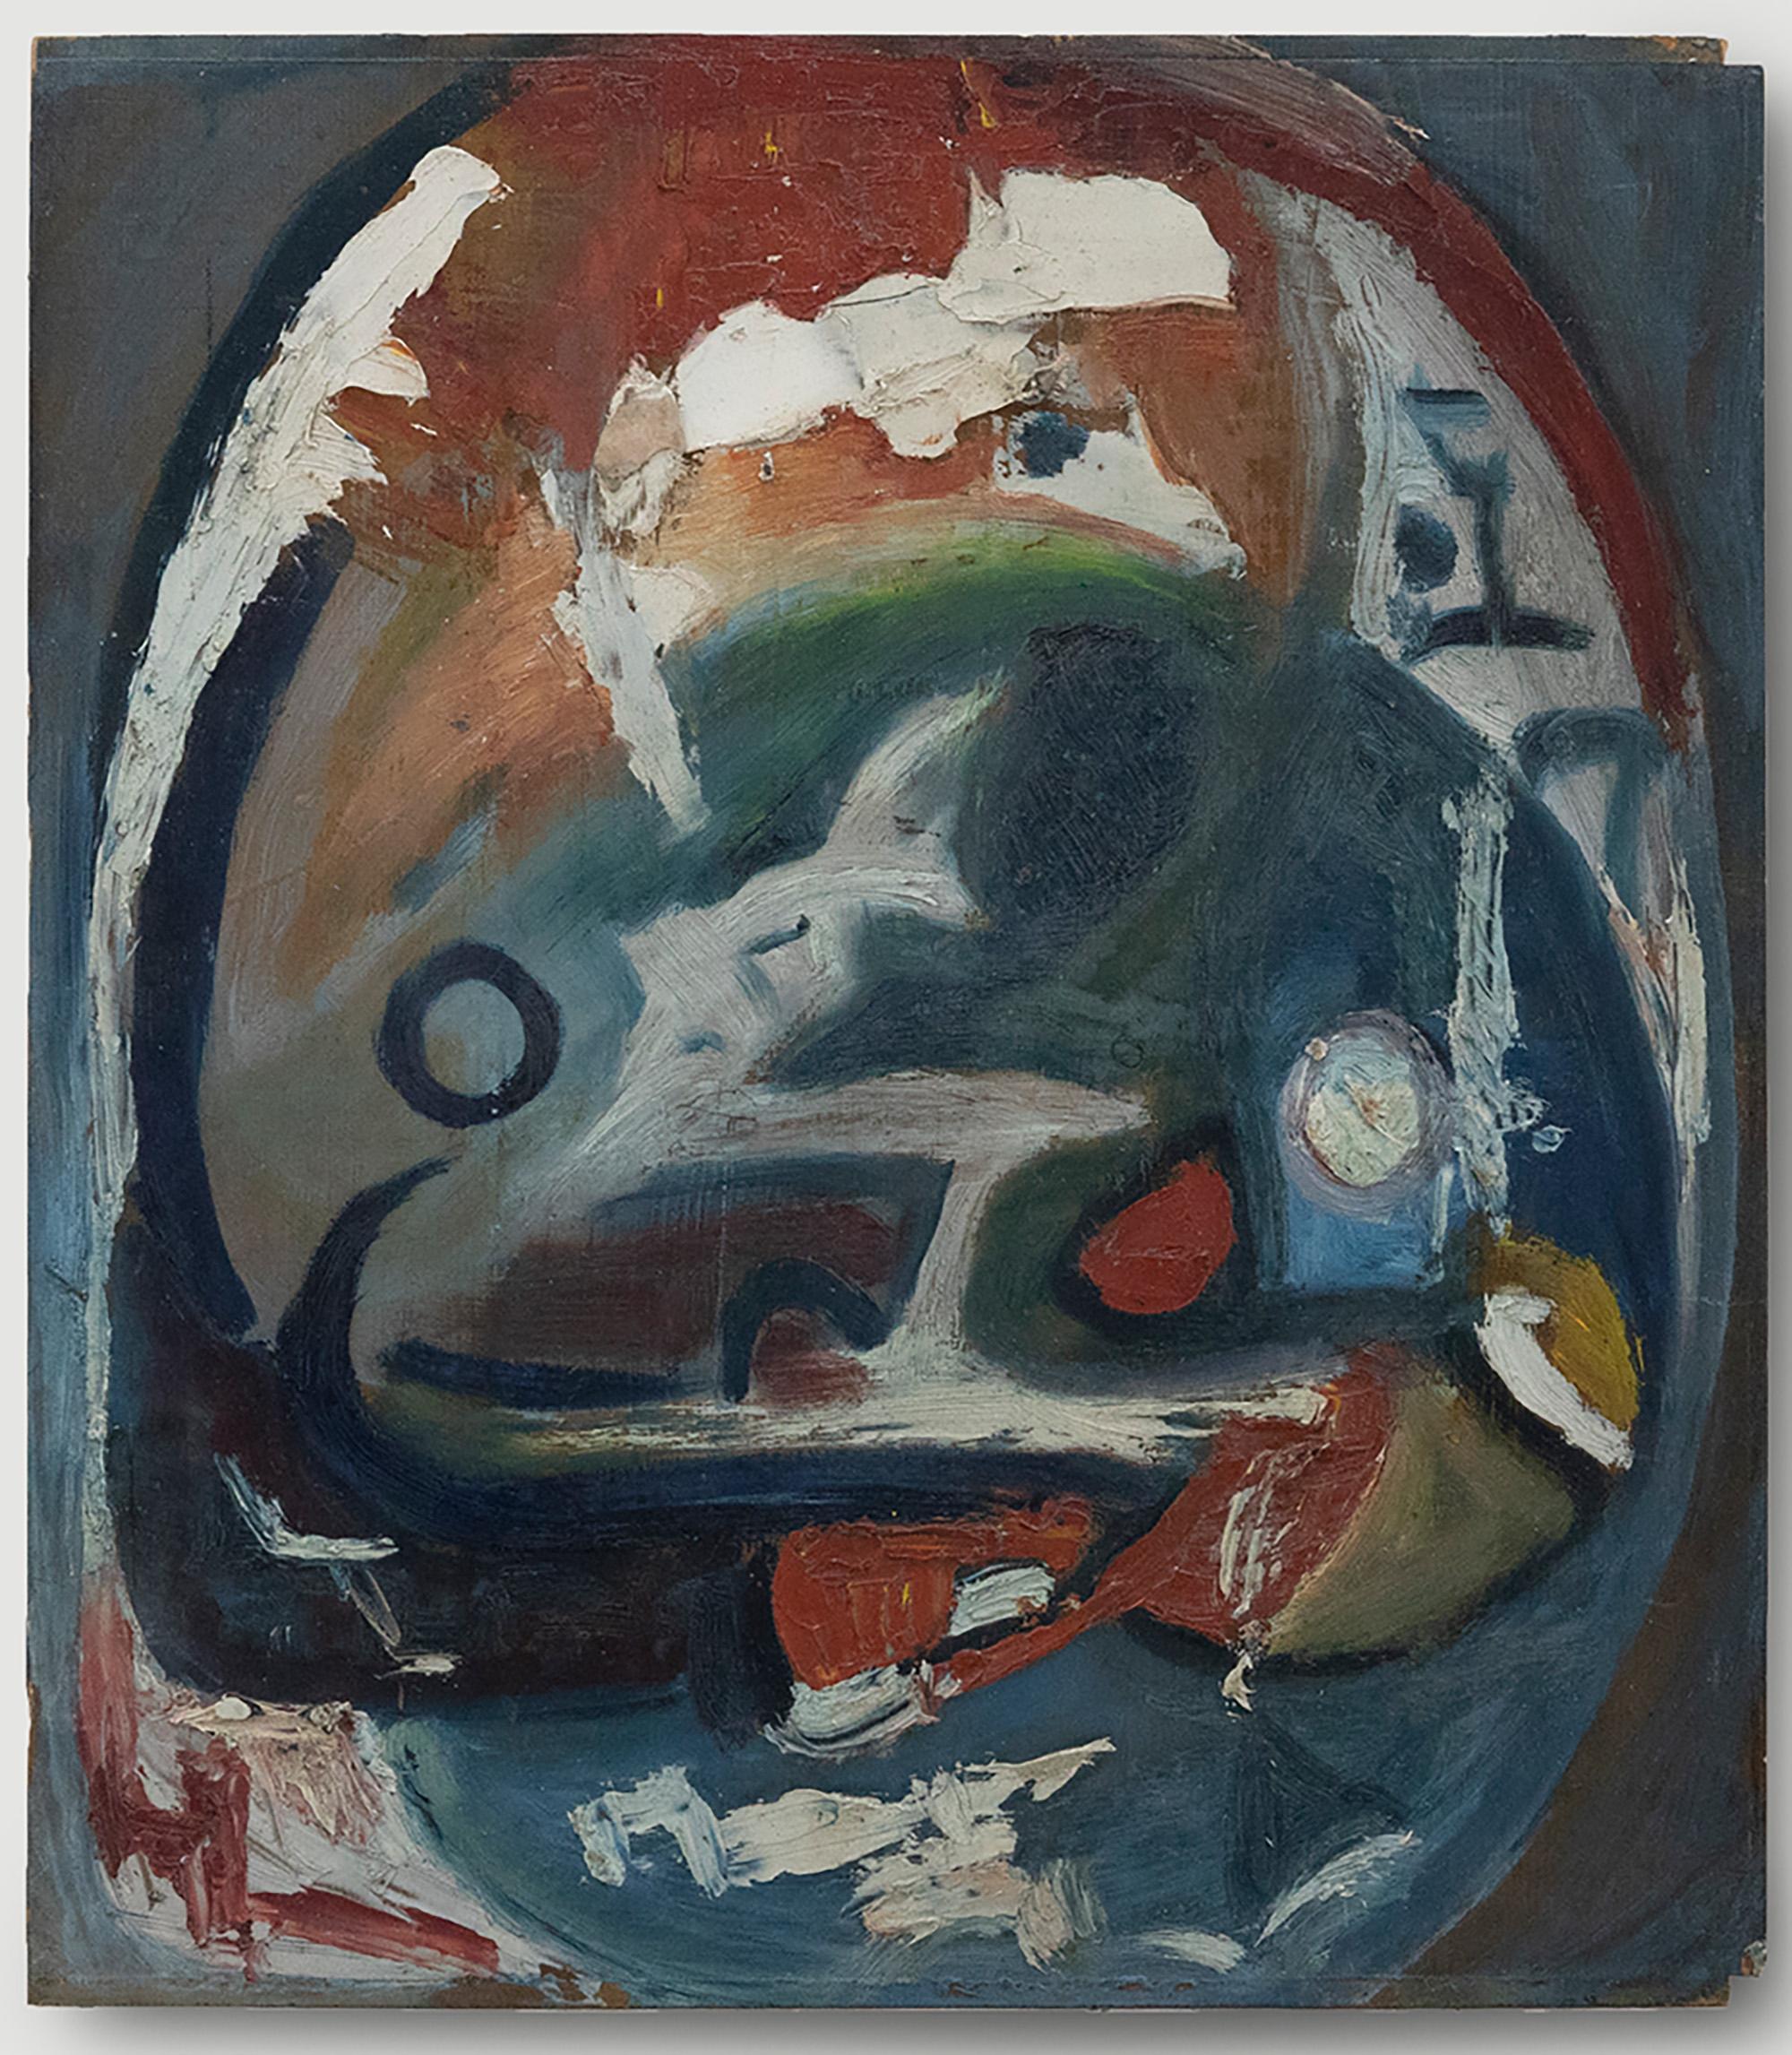 A striking 20th Century abstract oil, using areas of impasto paint and swirling shapes to create a dynamic composition. The painting is unsigned. On wood panel. 